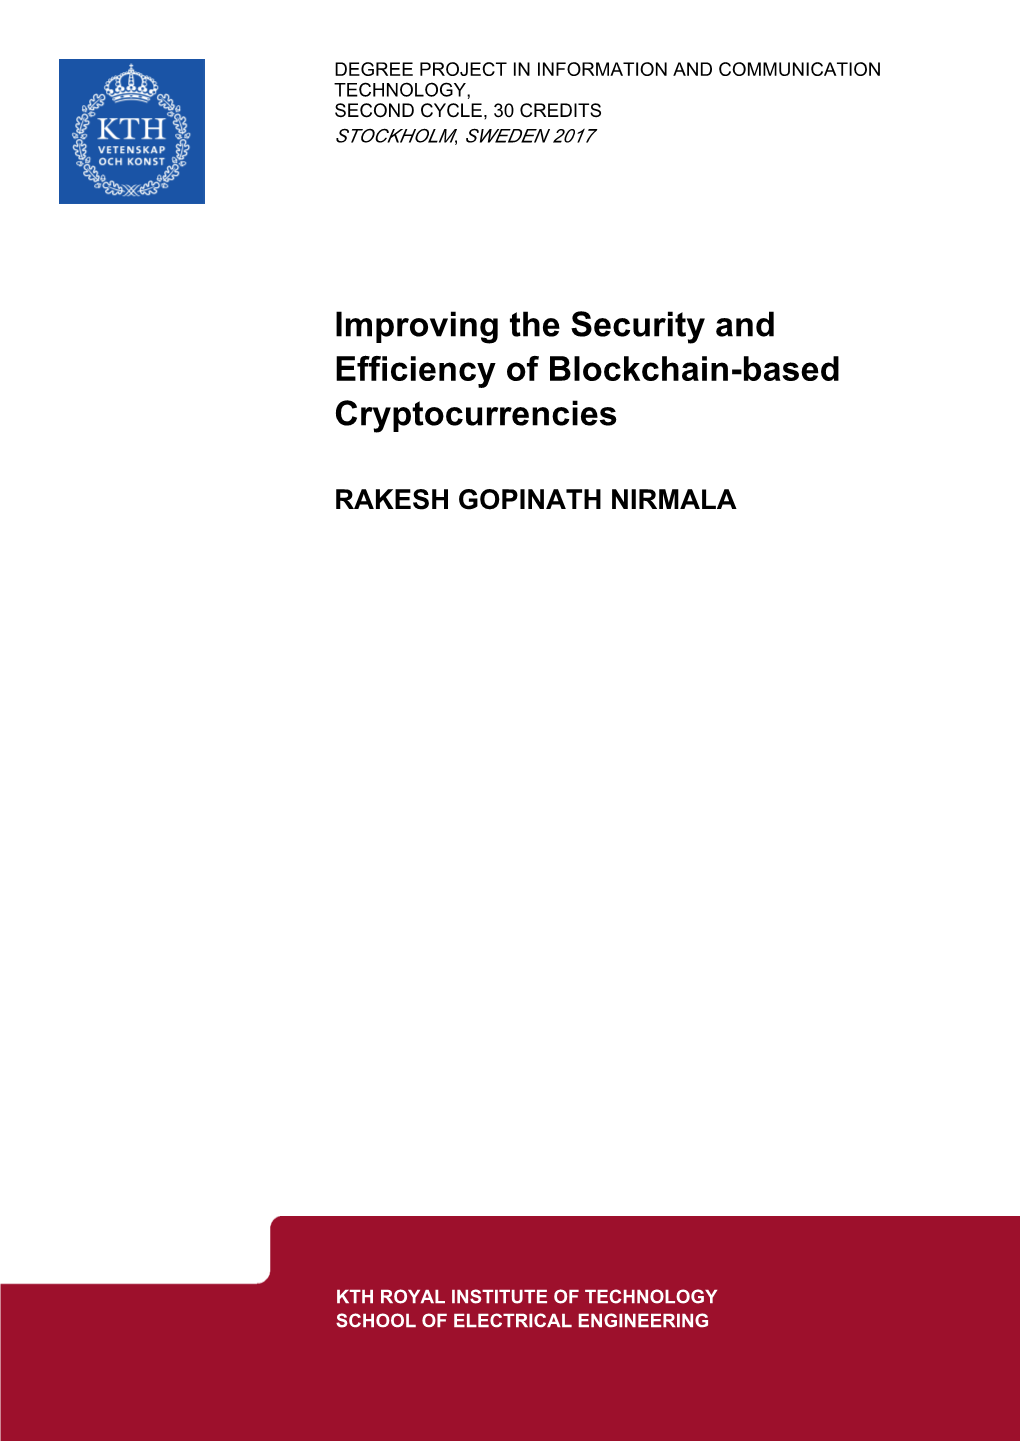 Improving the Security and Efficiency of Blockchain-Based Cryptocurrencies